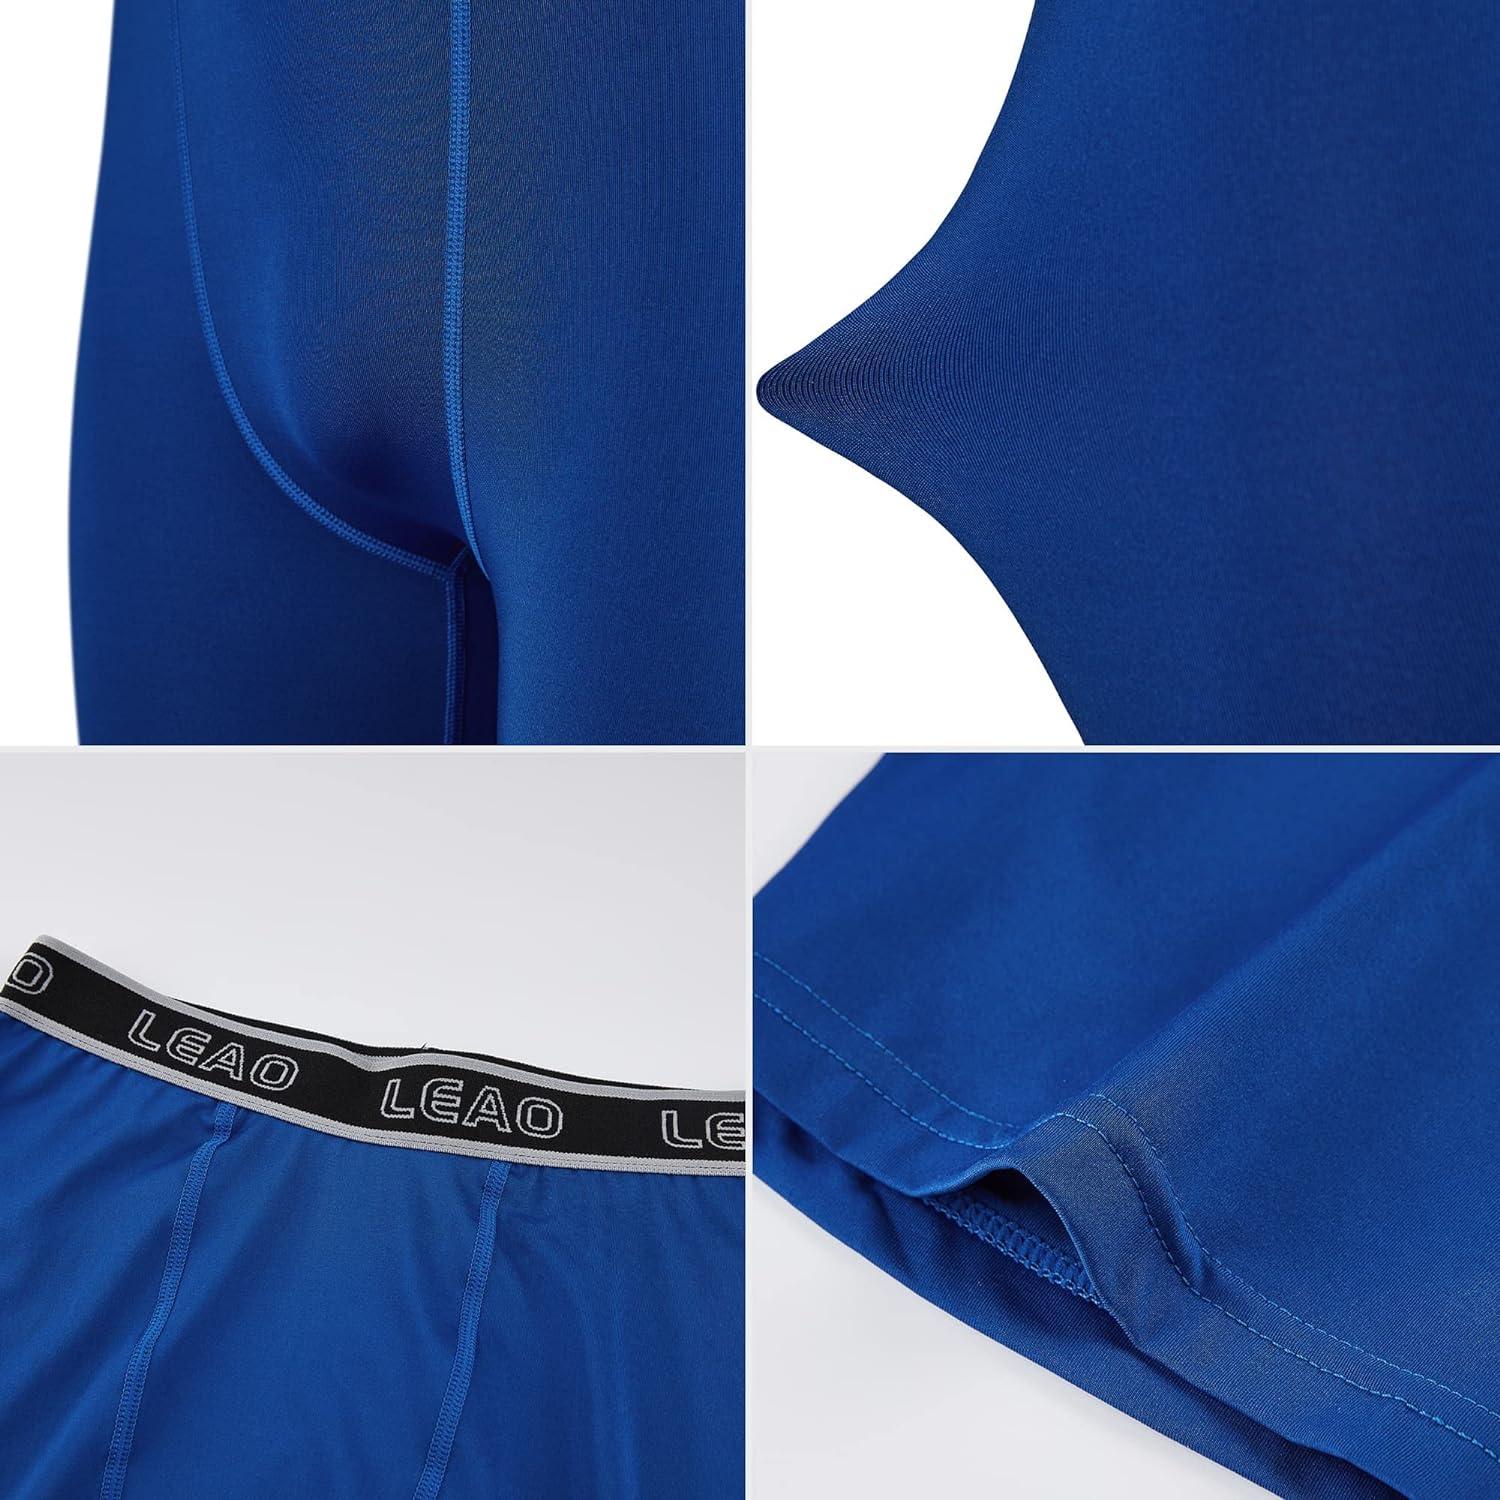 COOLOMG Youth Sliding Shorts with Protective Cup for Baseball